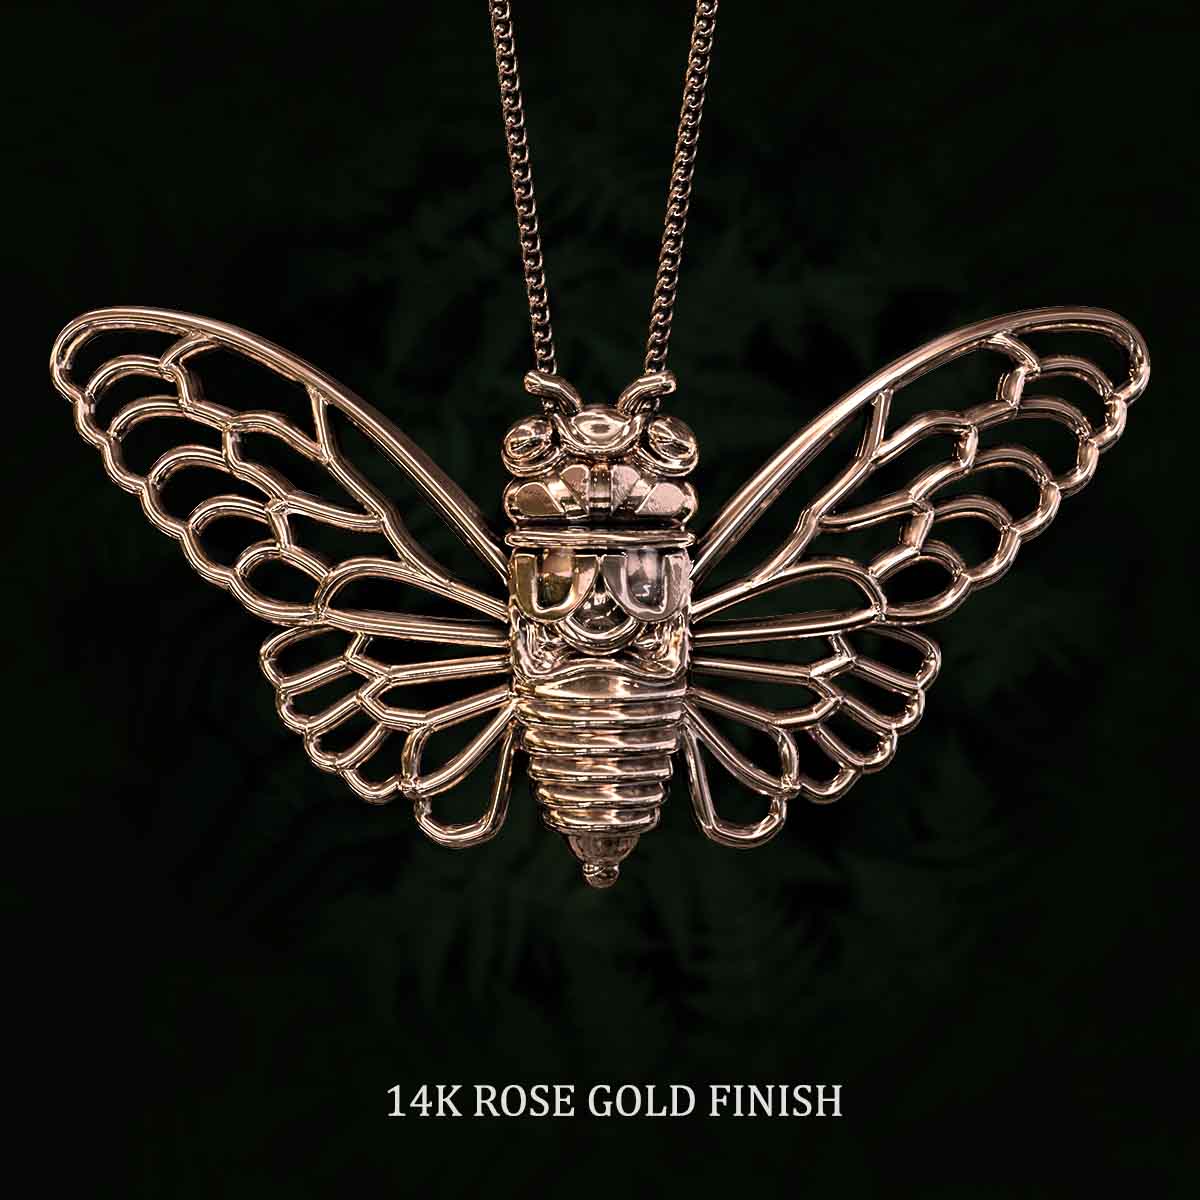 14k-Rose-Gold-Finish-Cicada-Pendant-Jewelry-For-Necklace